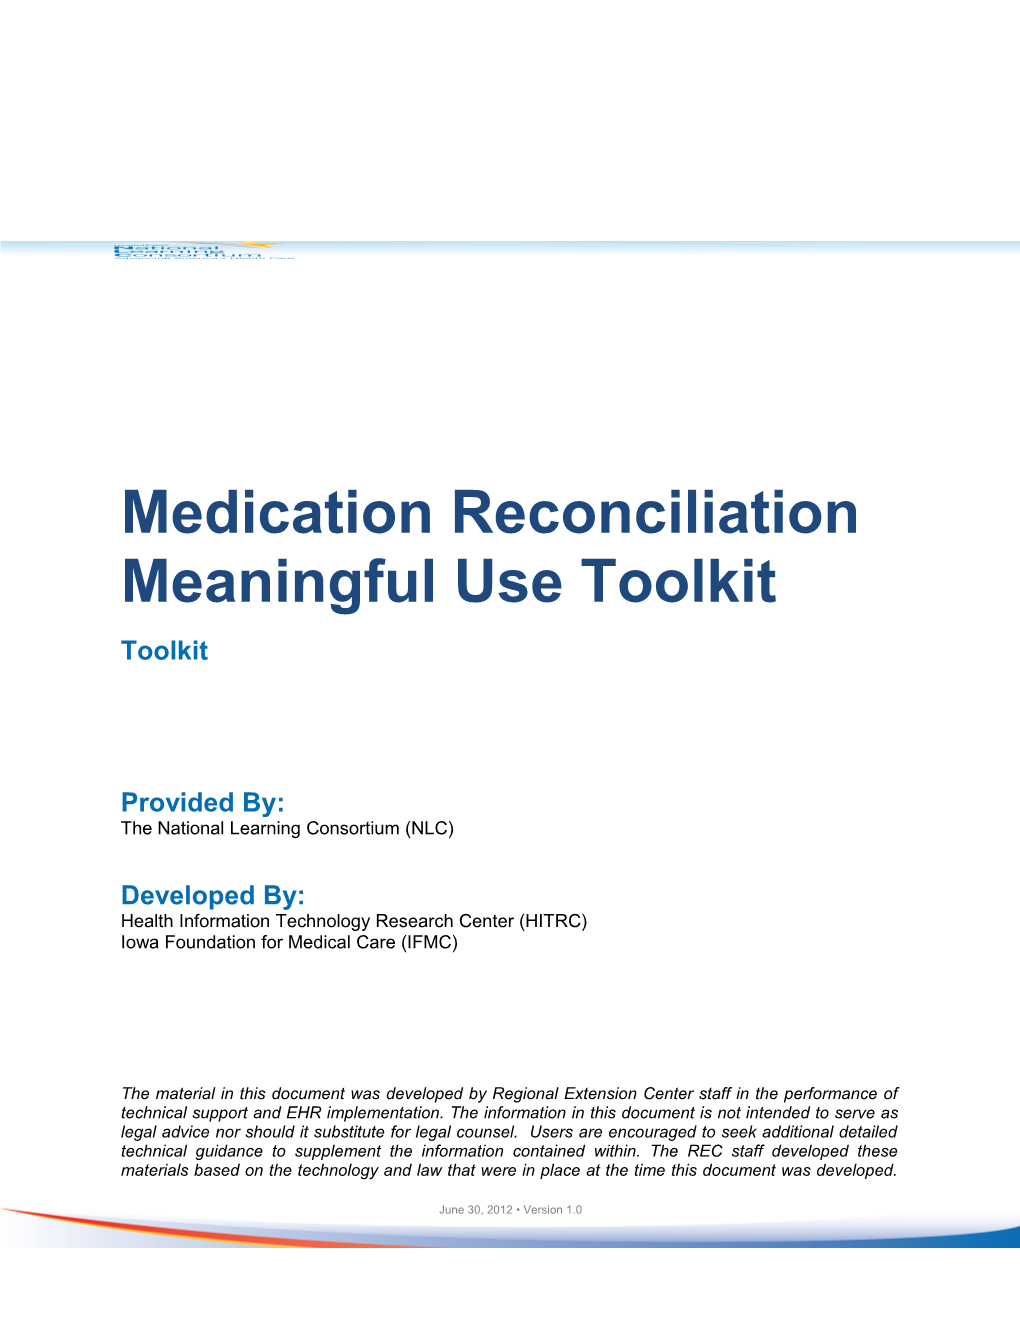 Medication Reconciliation Meaningful Use Toolkit